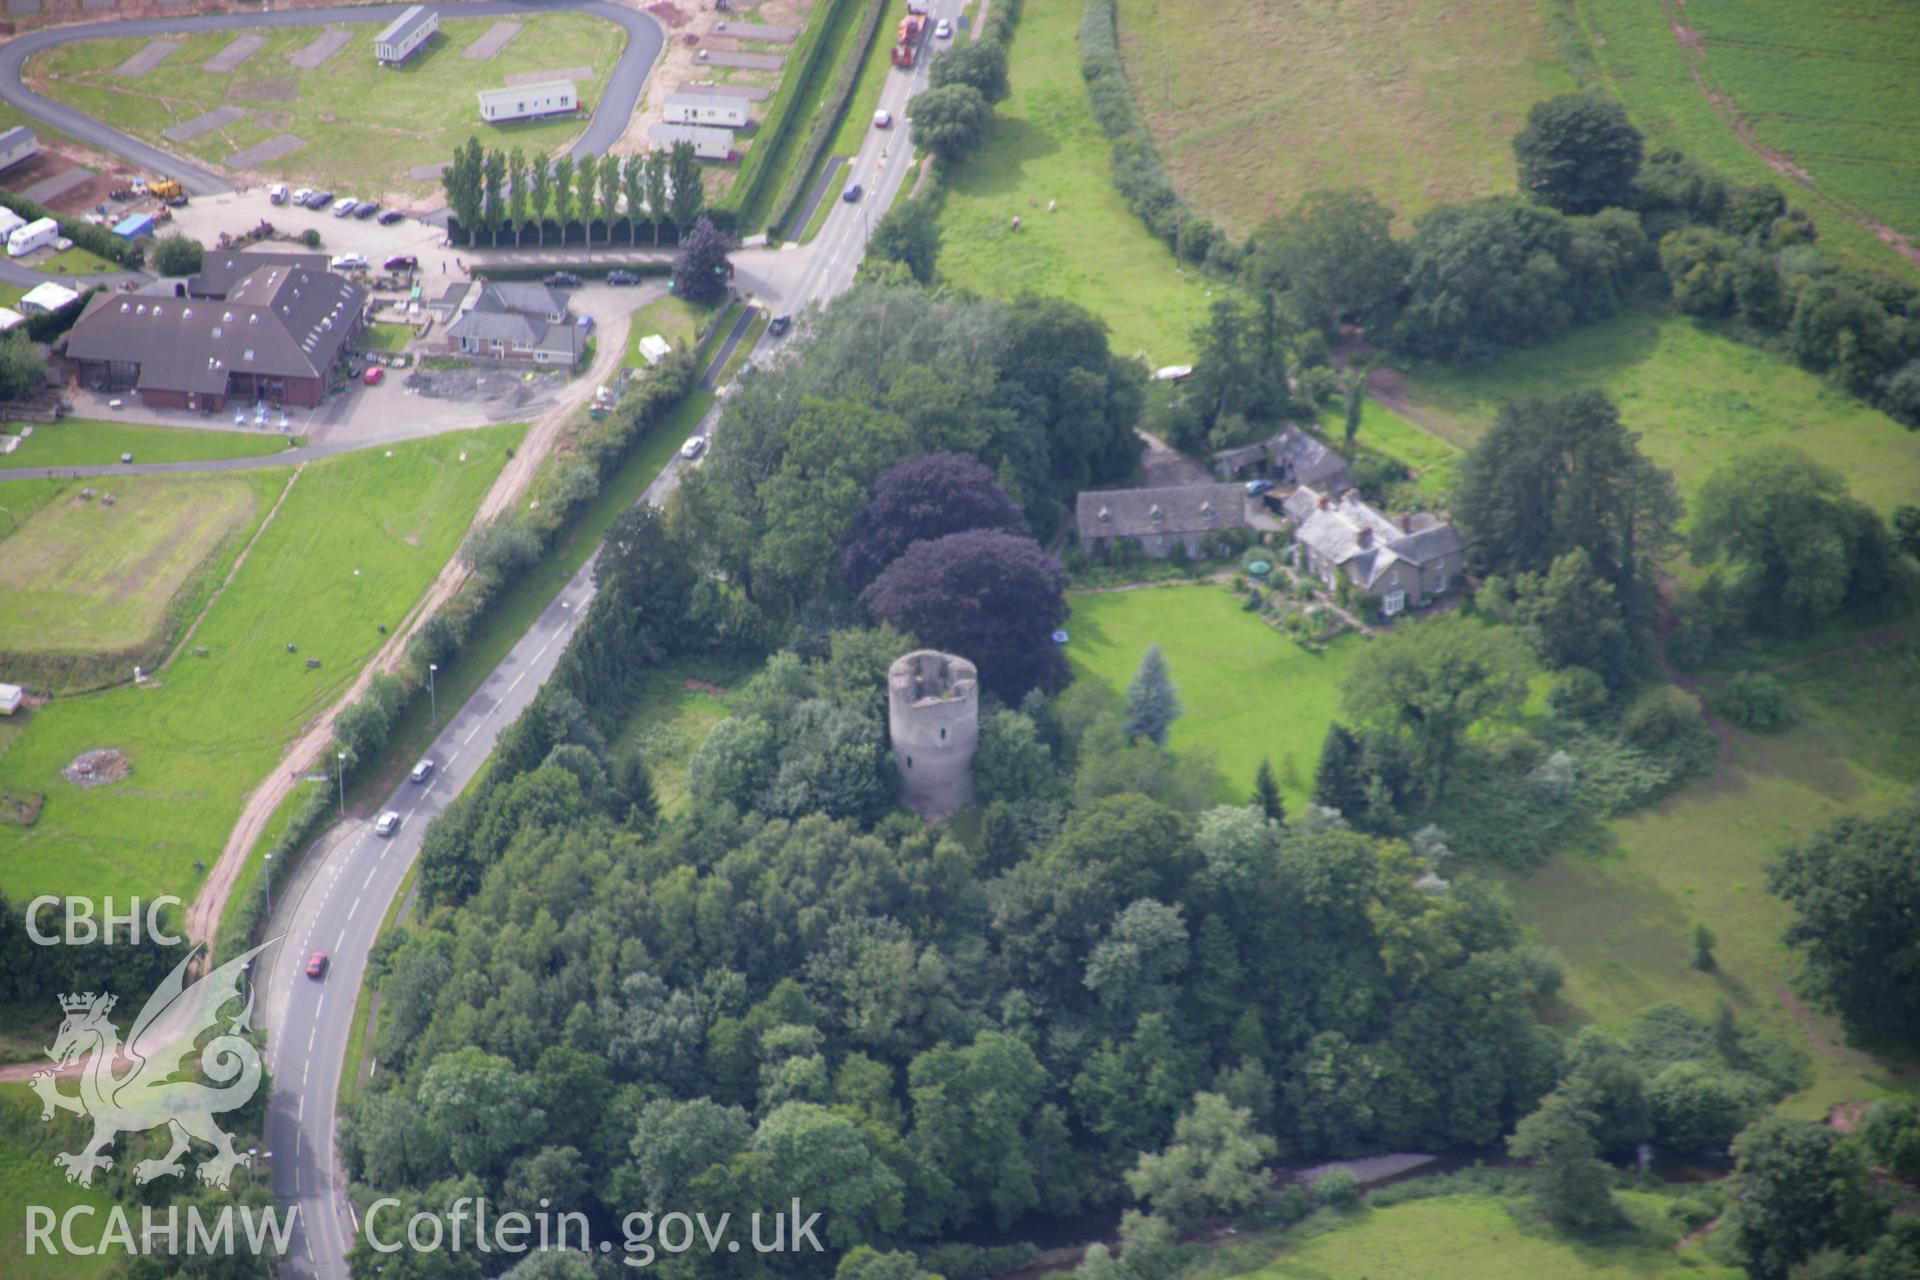 RCAHMW colour oblique aerial photograph of Bronllys Castle. Taken on 09 July 2007 by Toby Driver